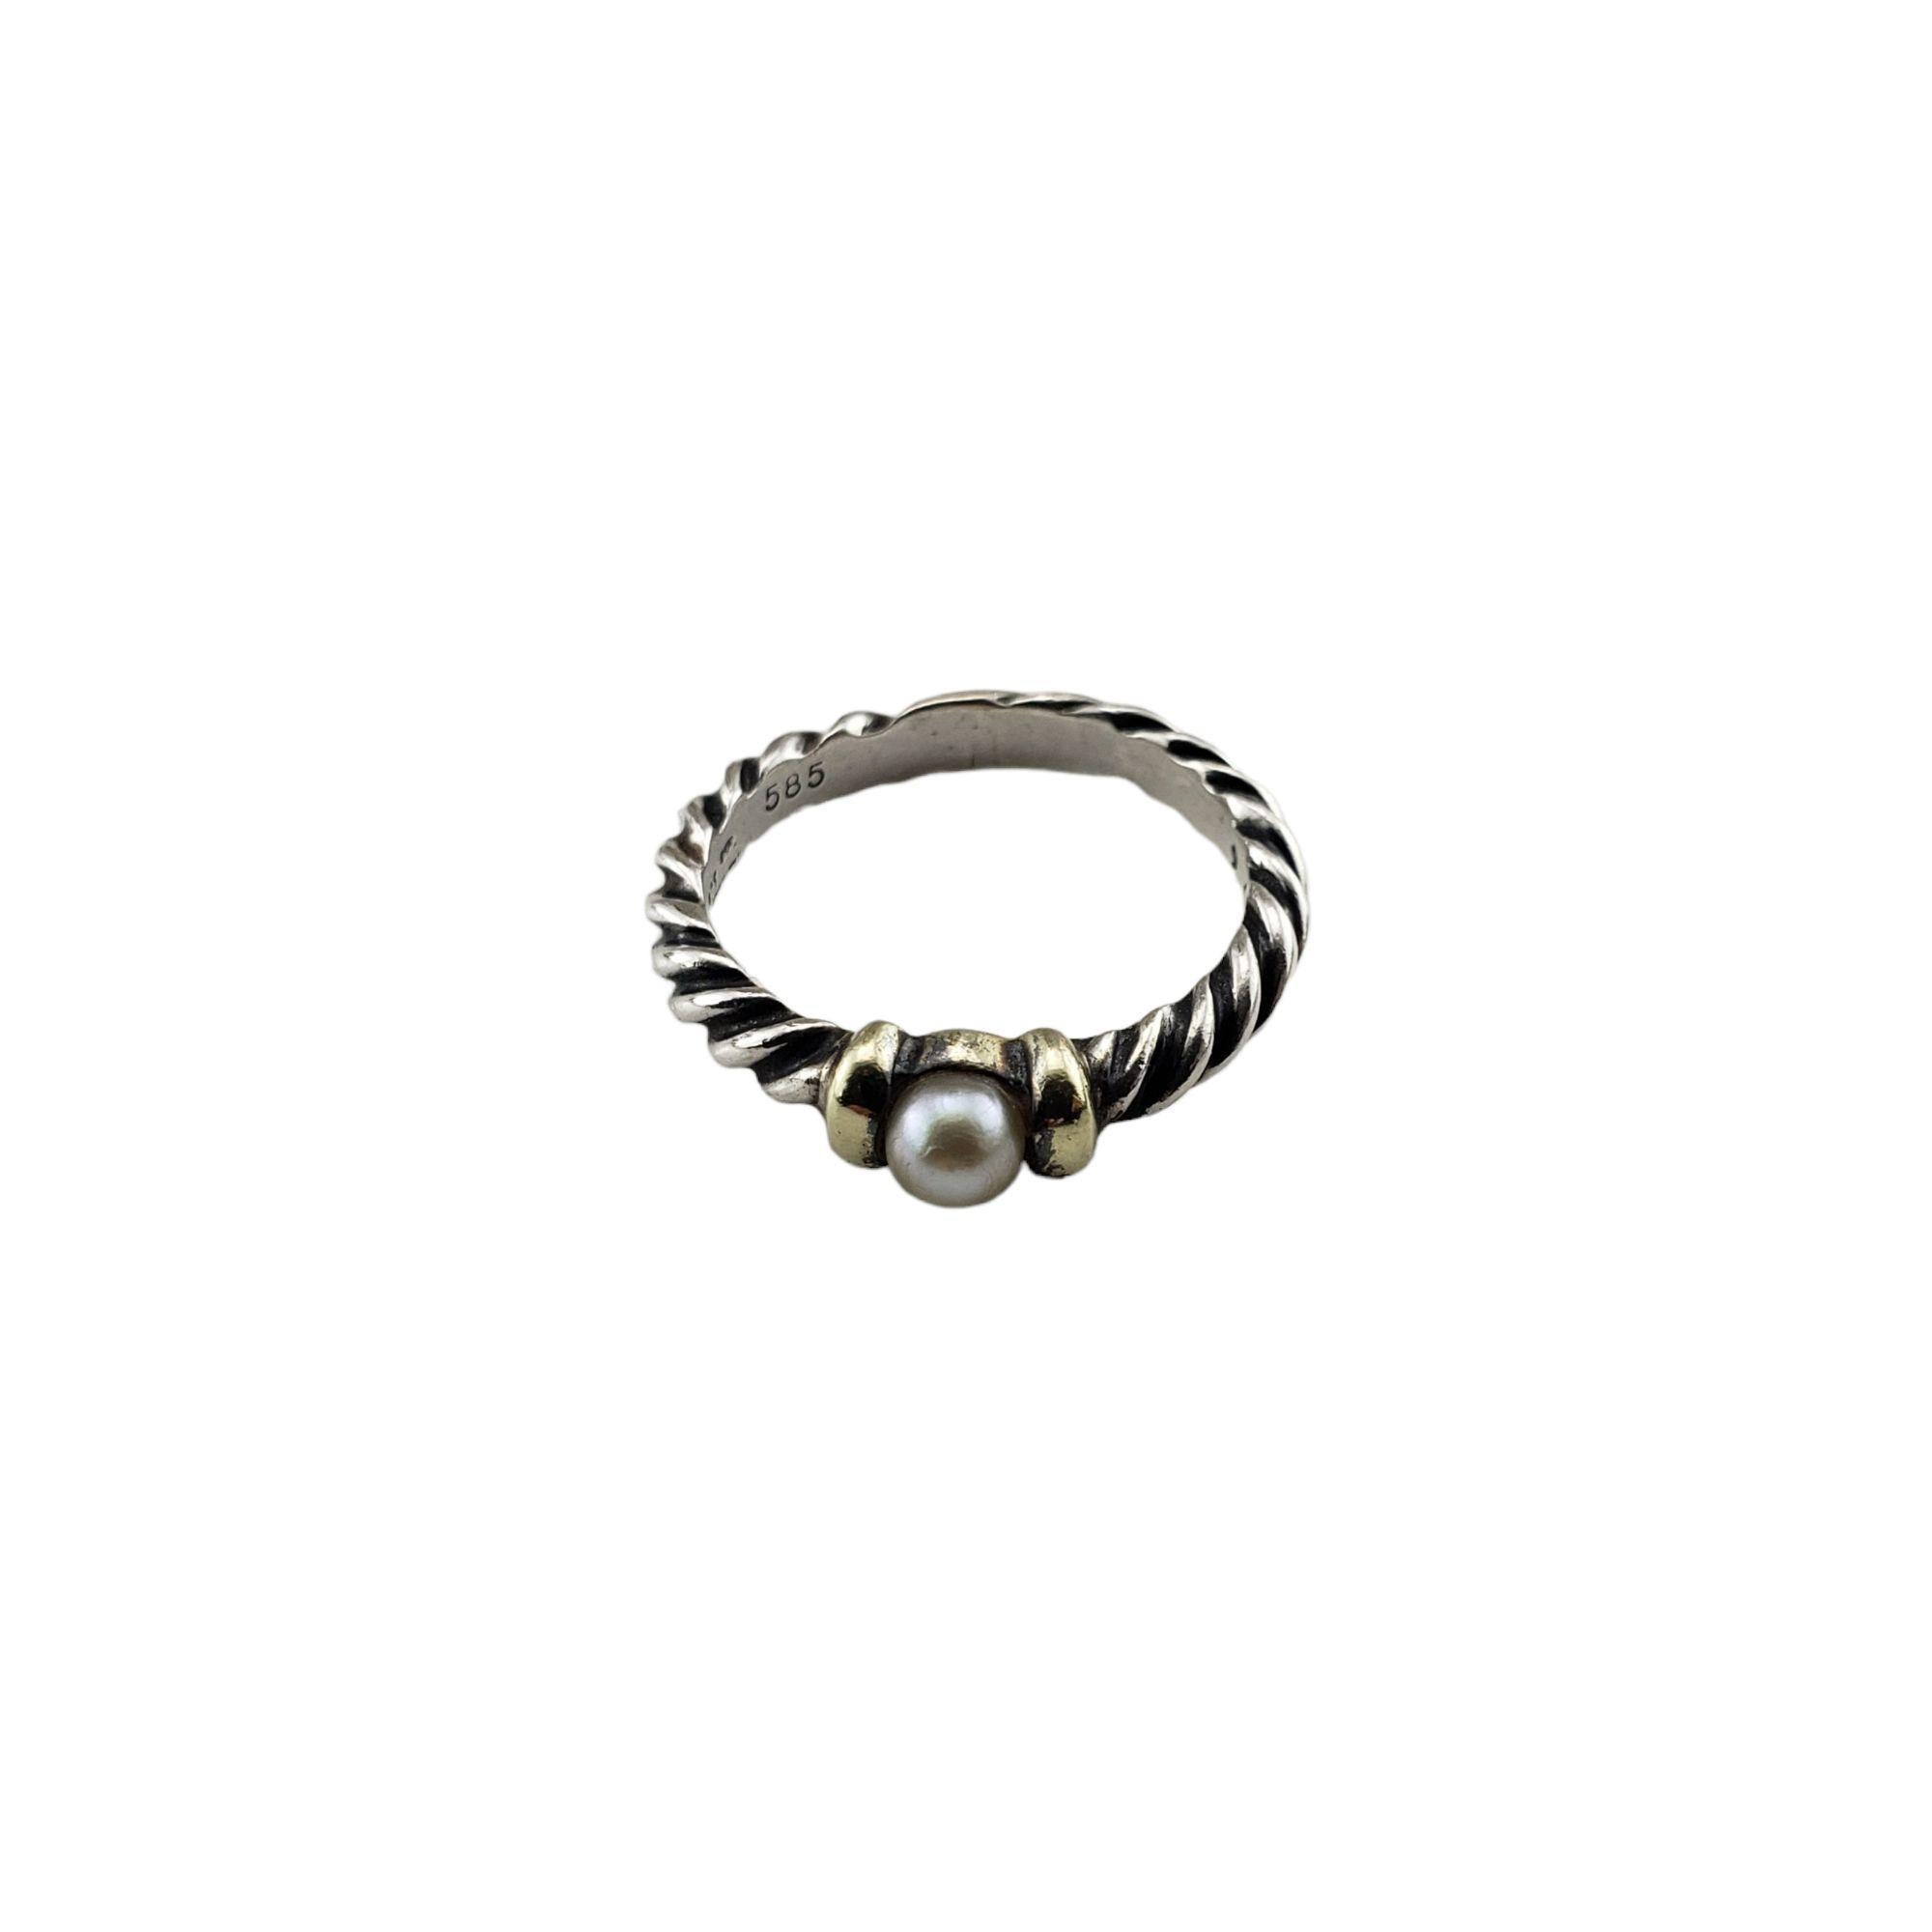 David Yurman Sterling Silver and 14 Karat Yellow Gold Pearl Ring Ring Size: 5-

This elegant ring by David Yurman features one round pearl ( 4 mm) set in sterling silver and 14K yellow gold. Shank: 3 mm.

Weight: 1.6 dwt. / 2.5